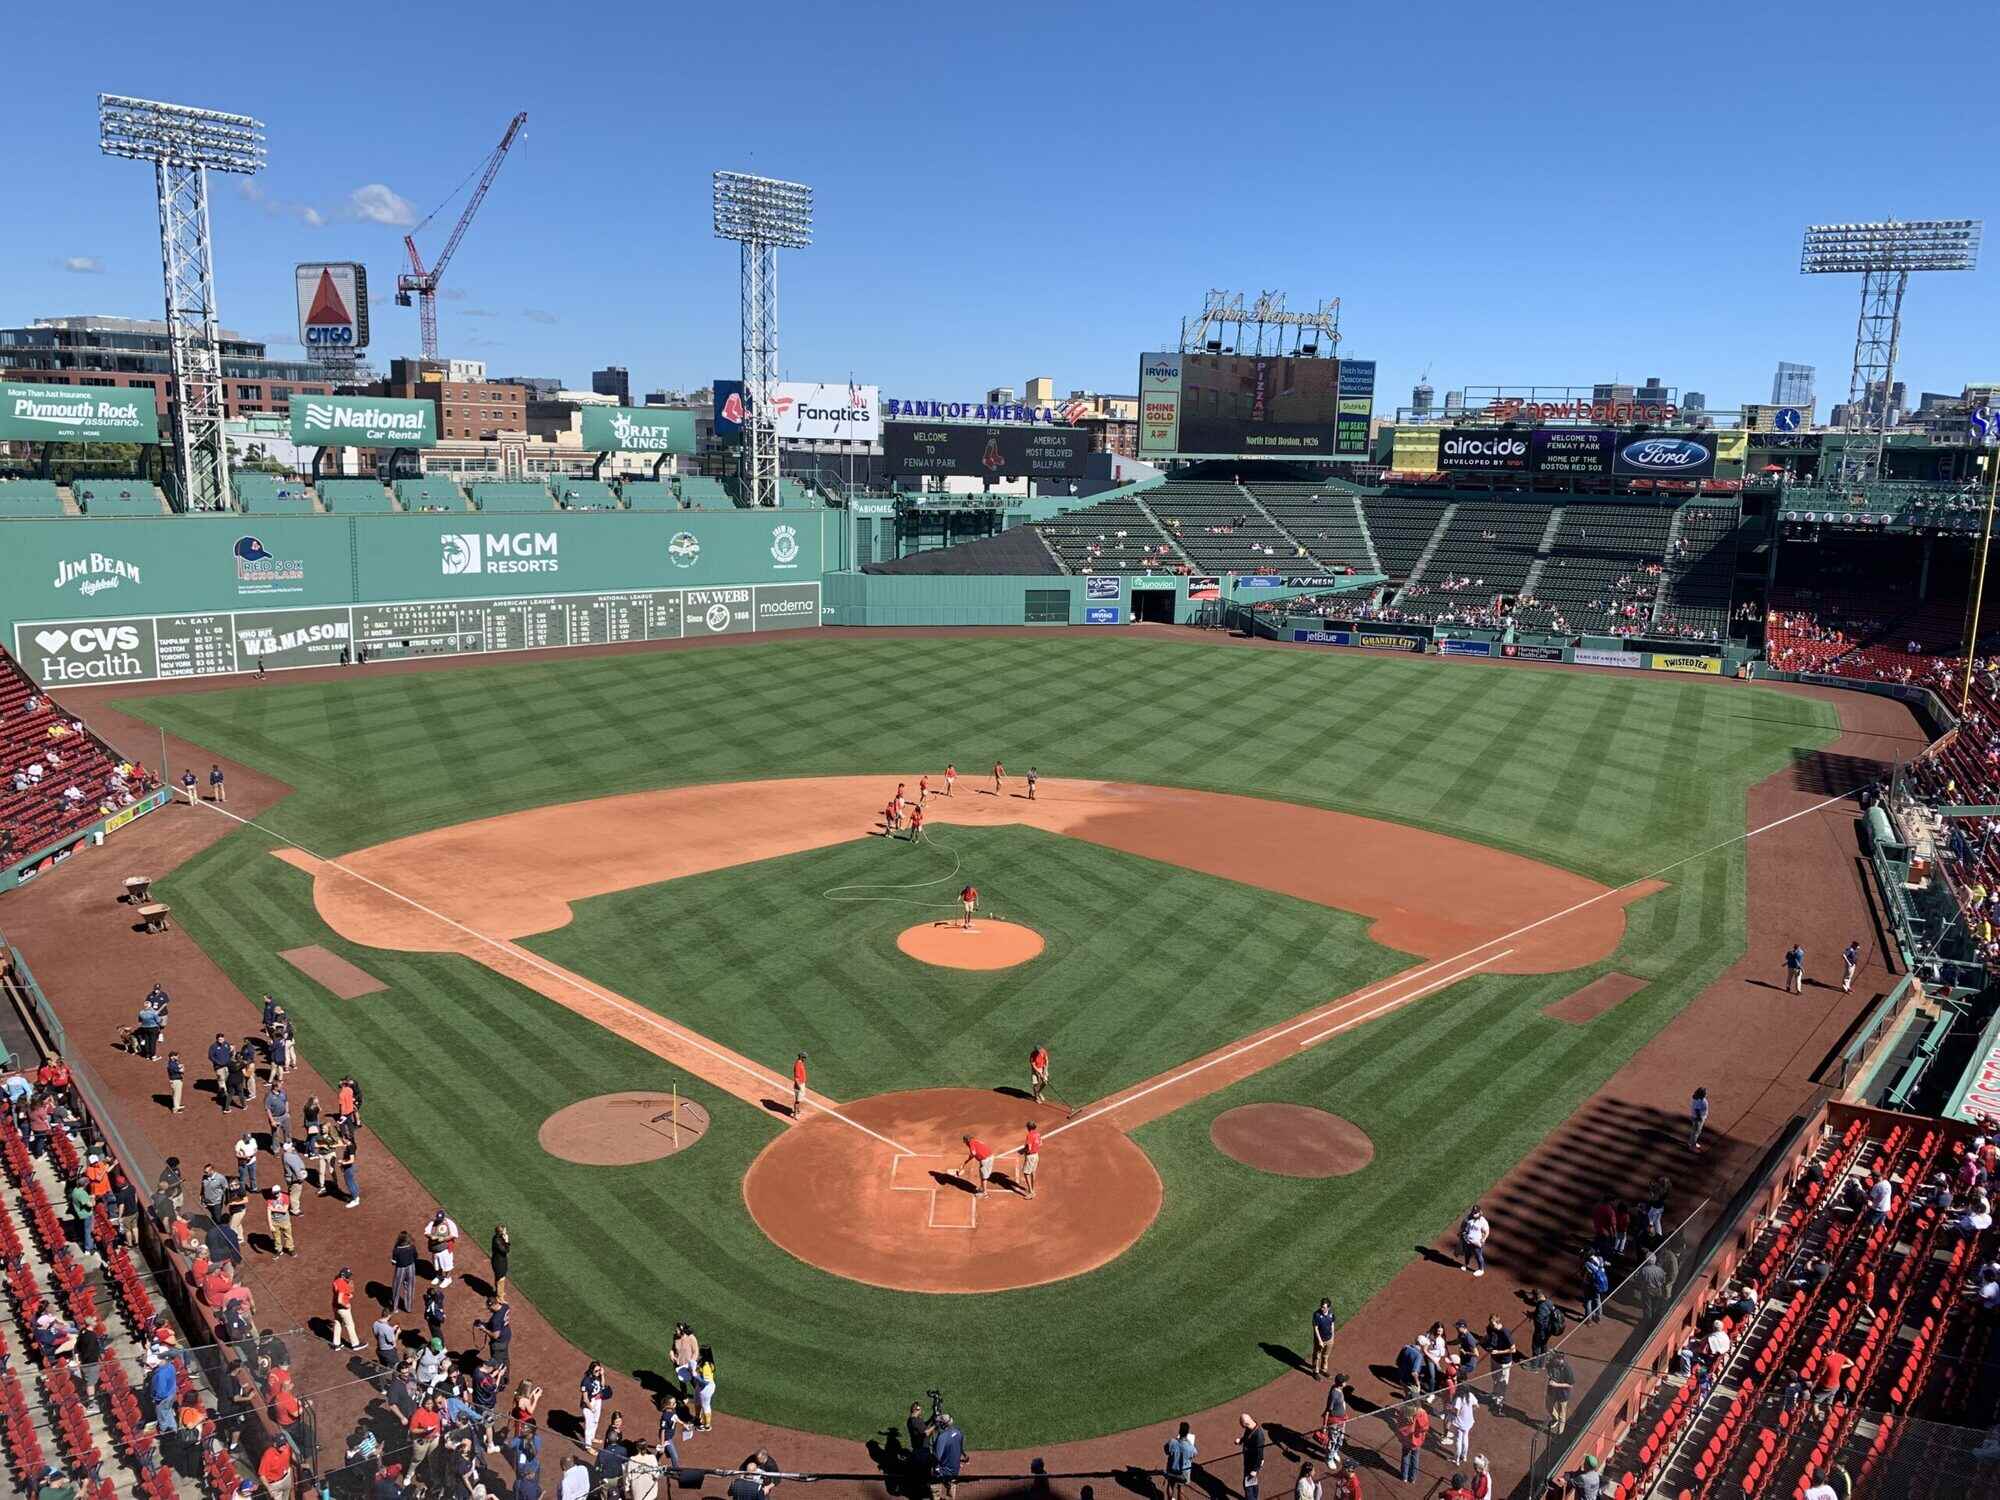 16-mind-blowing-facts-about-fenway-park